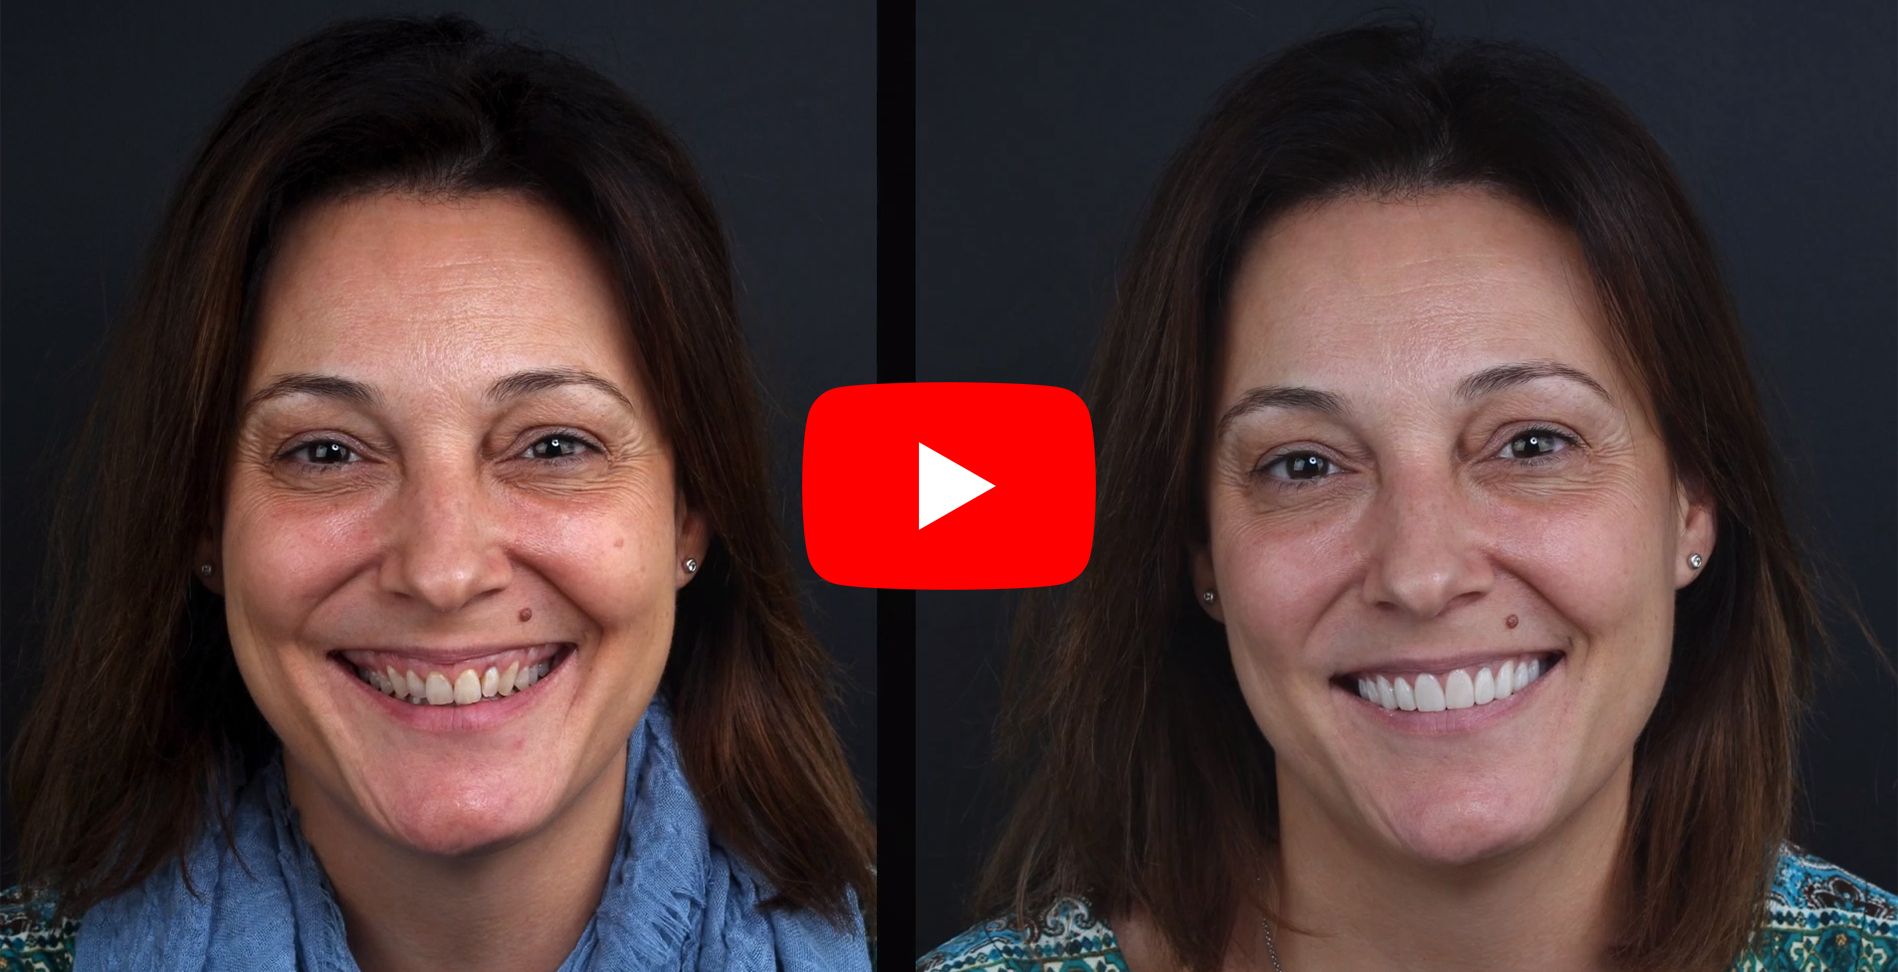 Video testimonials of patients treated at the Padrós dental clinic veneer